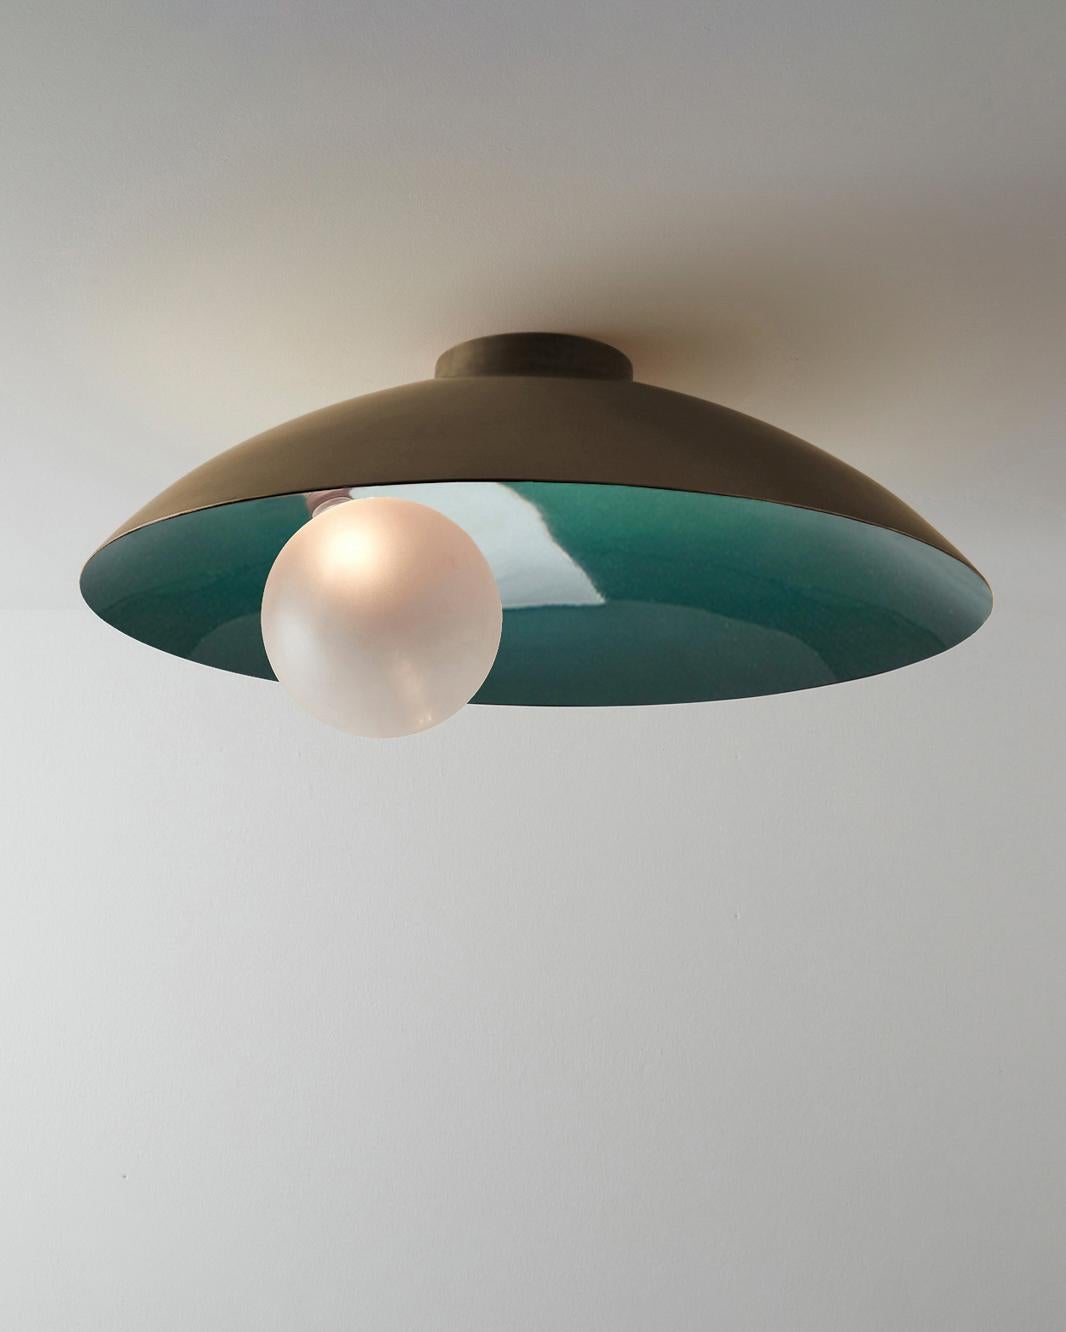 Oyster Emerald Green and Brushed Bronze Ceiling Mounted Lamp by Carla Baz
Dimensions: Ø 70 x H 26 cm.
Materials: Brushed bronze.
Weight: 9 kg.

Available in brushed brass, copper or bronze finishes. Available in different color options. Please